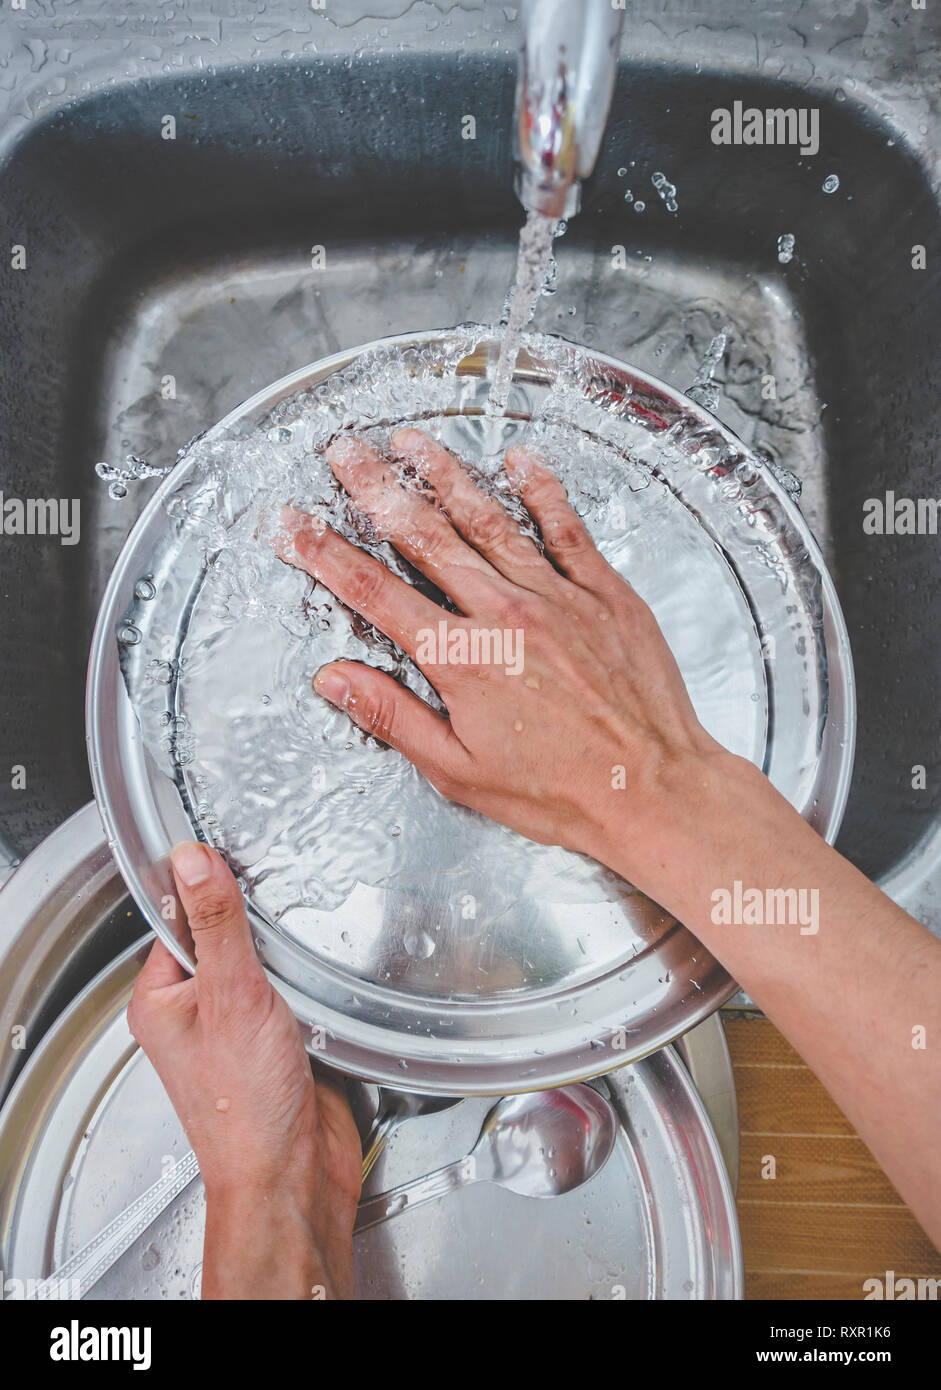 Personal perspective view of hands wash utensils over the sink in kitchen Stock Photo